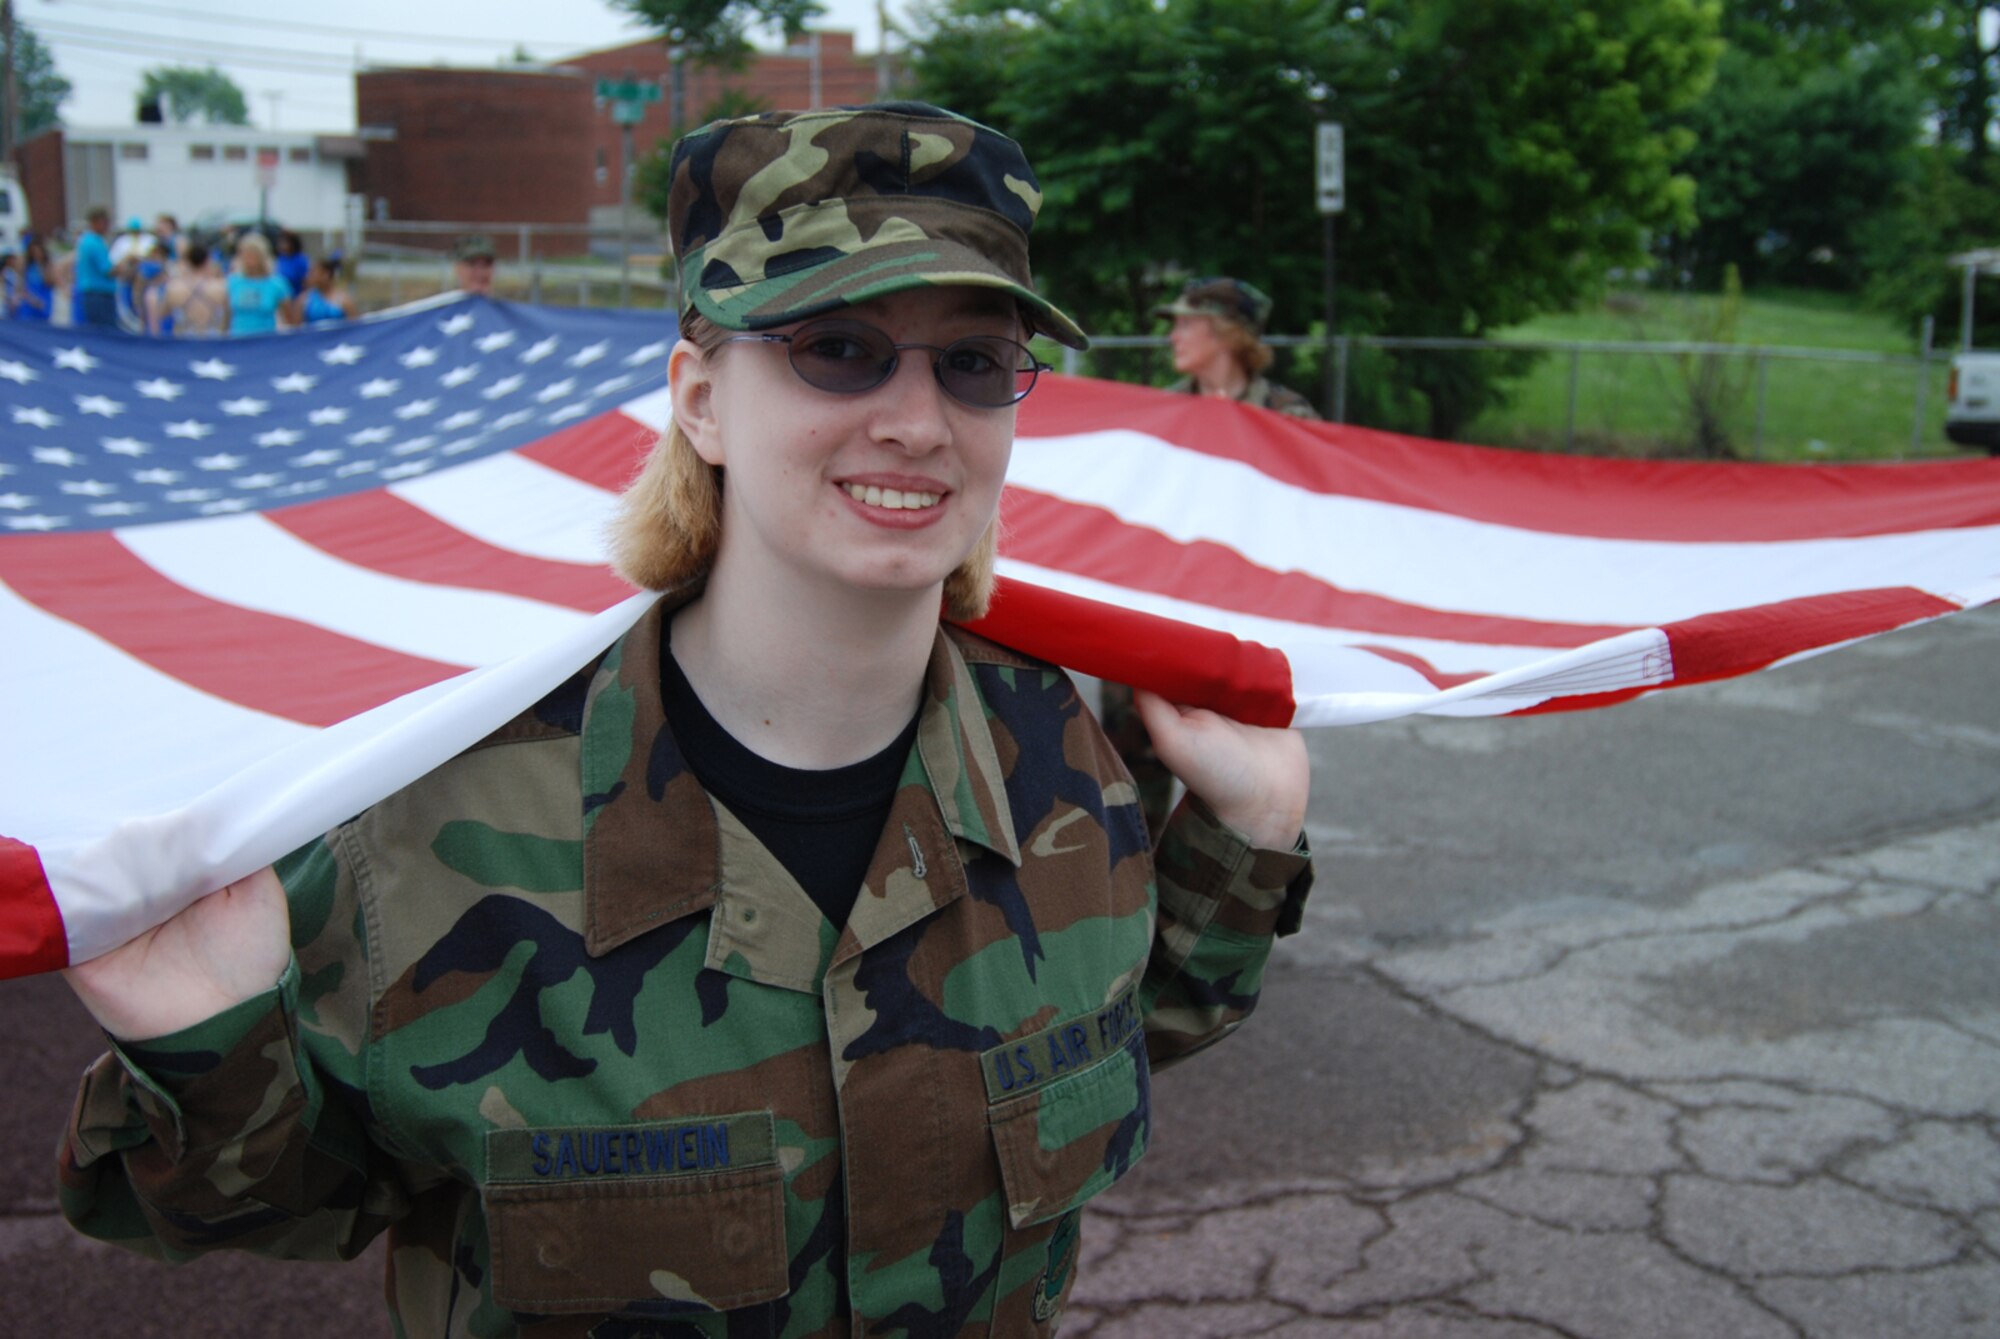 Airman 1st Class Jennifer Sauerwein of the 932nd Airlift Wing, prepares to march in the 2007 Belleville Memorial Day parade.